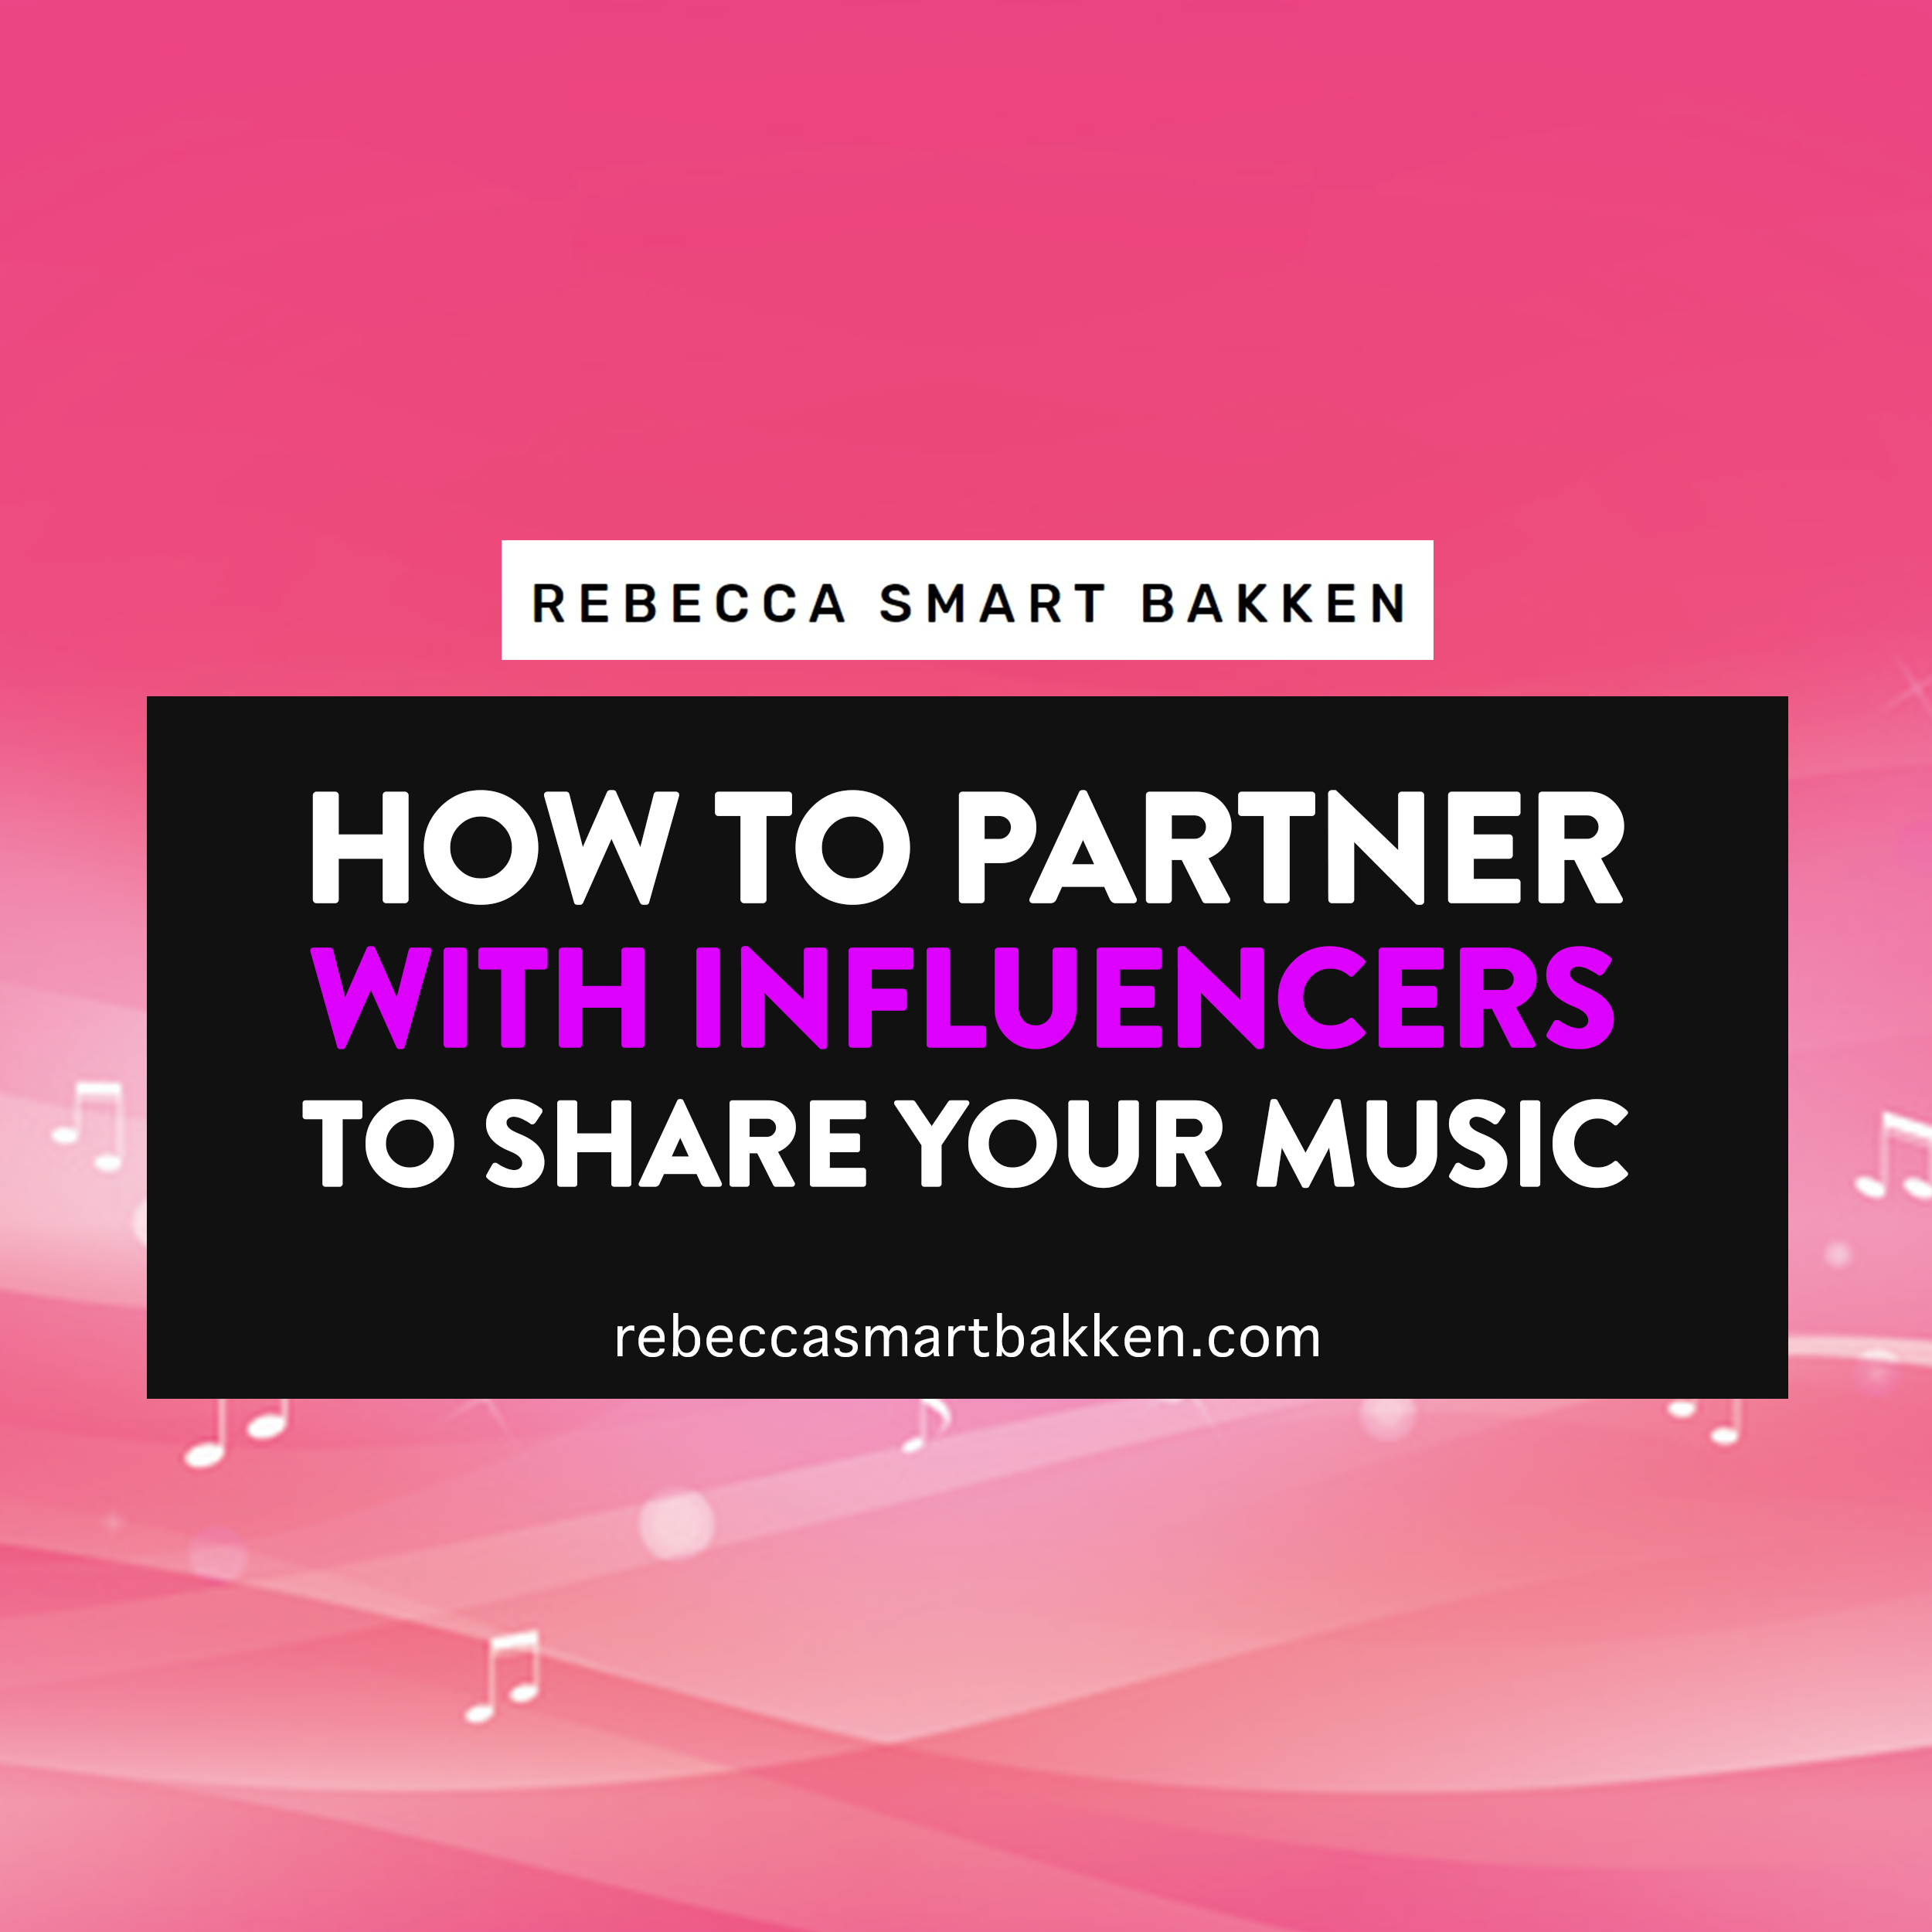 How To Partner With Influencers To Share Your Music